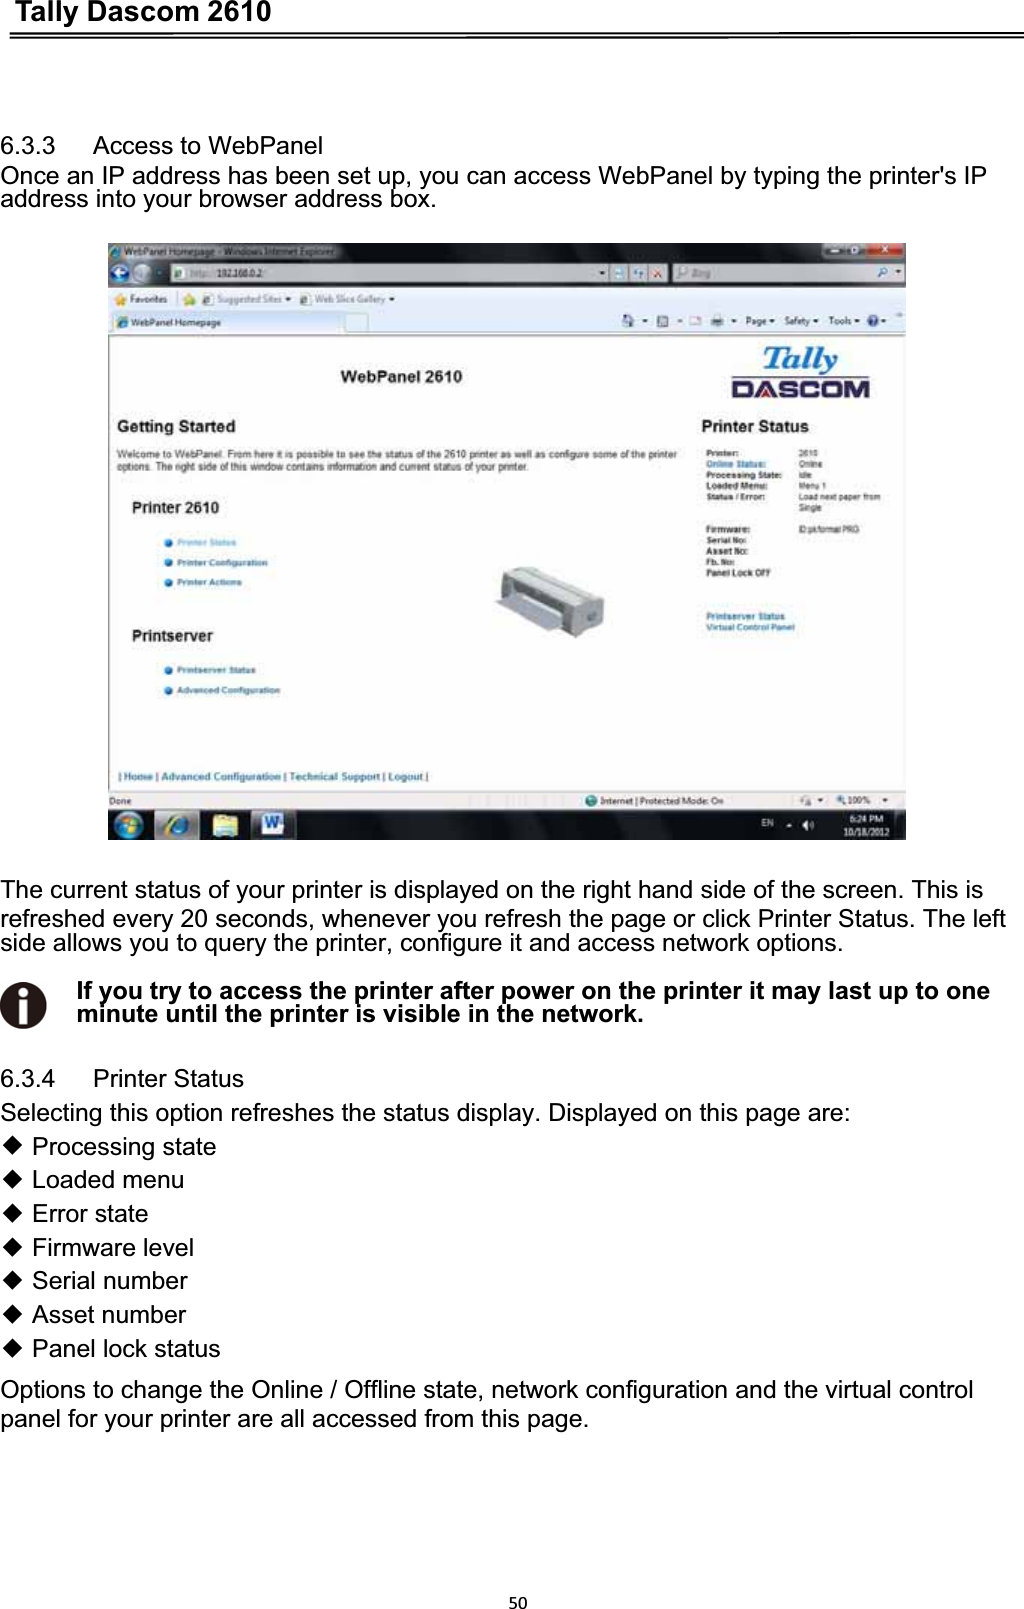 Tally Dascom 2610506.3.3   Access to WebPanel Once an IP address has been set up, you can access WebPanel by typing the printer&apos;s IP address into your browser address box. The current status of your printer is displayed on the right hand side of the screen. This is refreshed every 20 seconds, whenever you refresh the page or click Printer Status. The left   side allows you to query the printer, configure it and access network options. If you try to access the printer after power on the printer it may last up to one minute until the printer is visible in the network. 6.3.4   Printer Status Selecting this option refreshes the status display. Displayed on this page are: ƹ Processing stateƹ Loaded menuƹ Error stateƹ Firmware levelƹ Serial number ƹ Asset numberƹ Panel lock statusOptions to change the Online / Offline state, network configuration and the virtual control panel for your printer are all accessed from this page. 